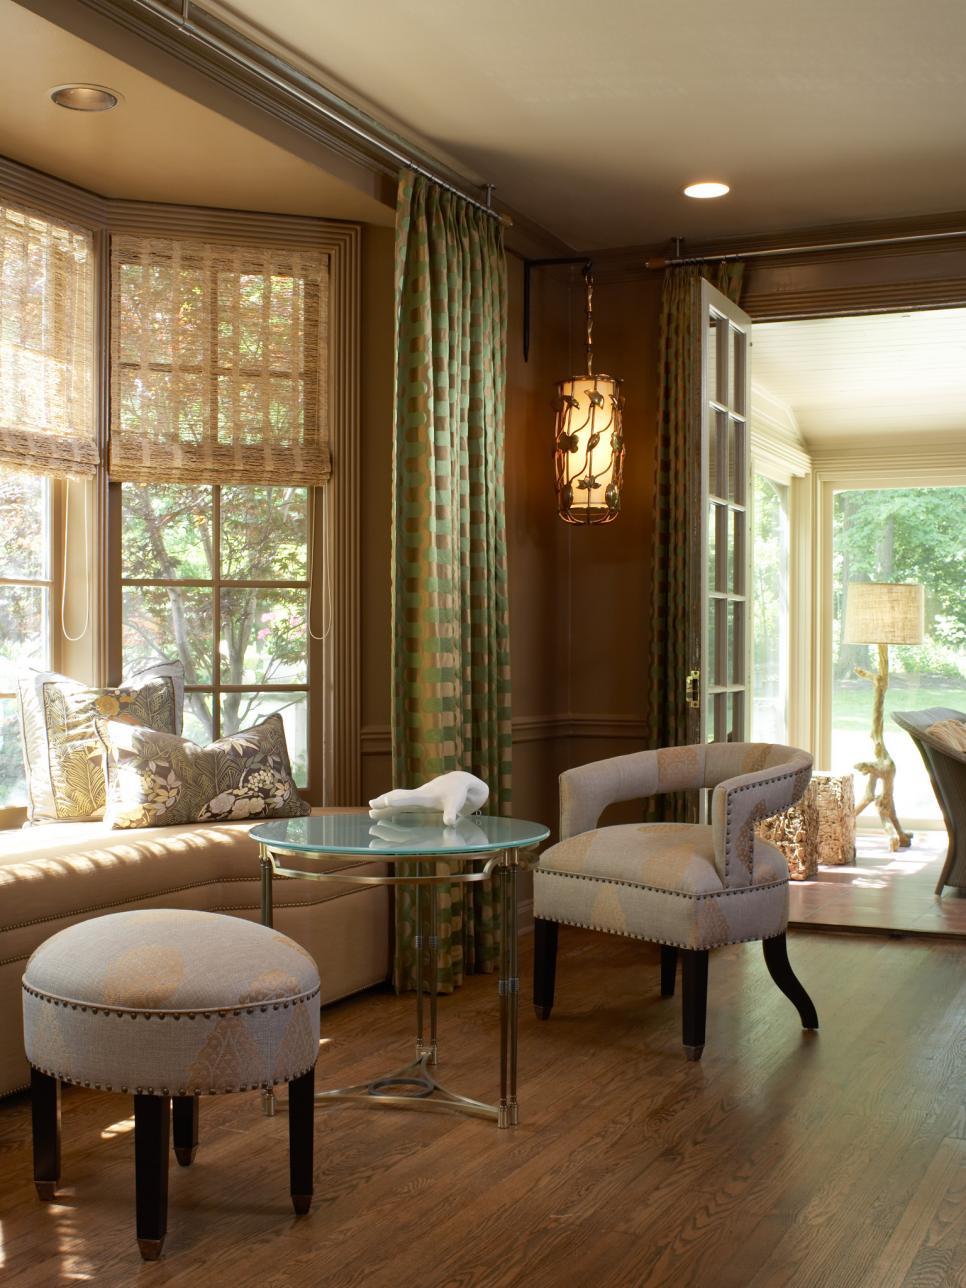 Transitional, Brown Living Room With Bay Window